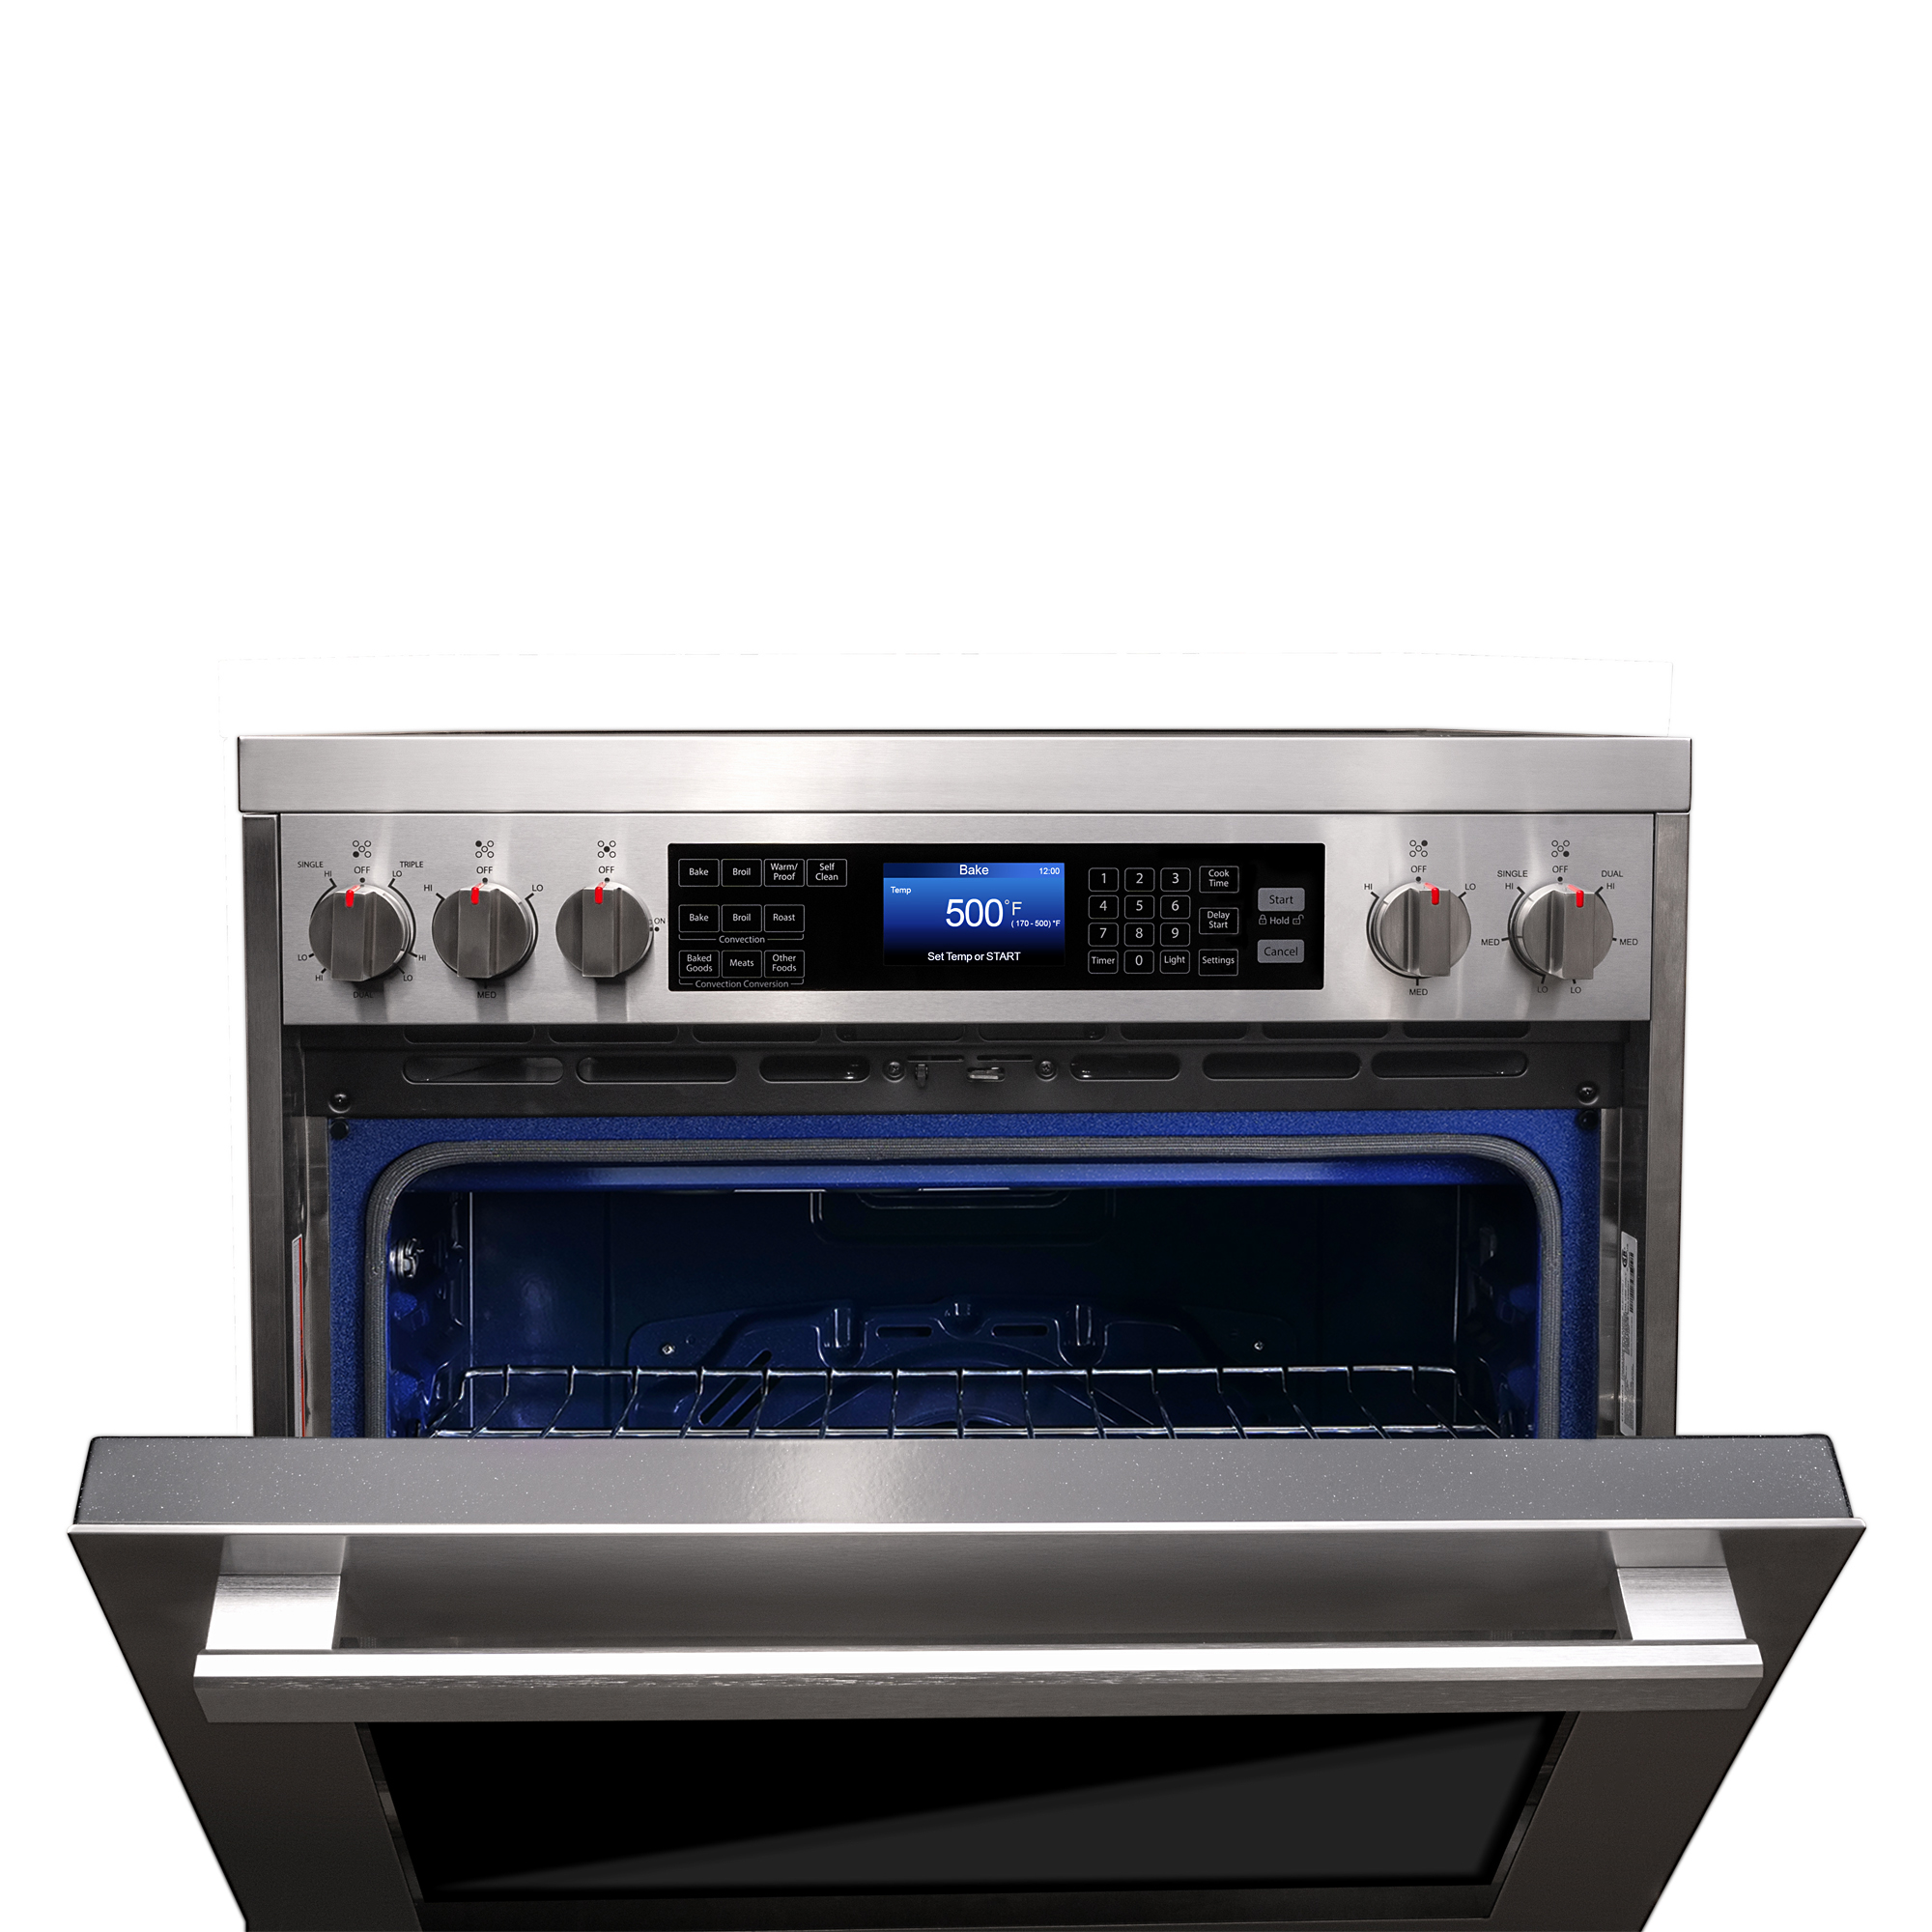 Cosmo 30" Commercial Electric Range with Convection Oven